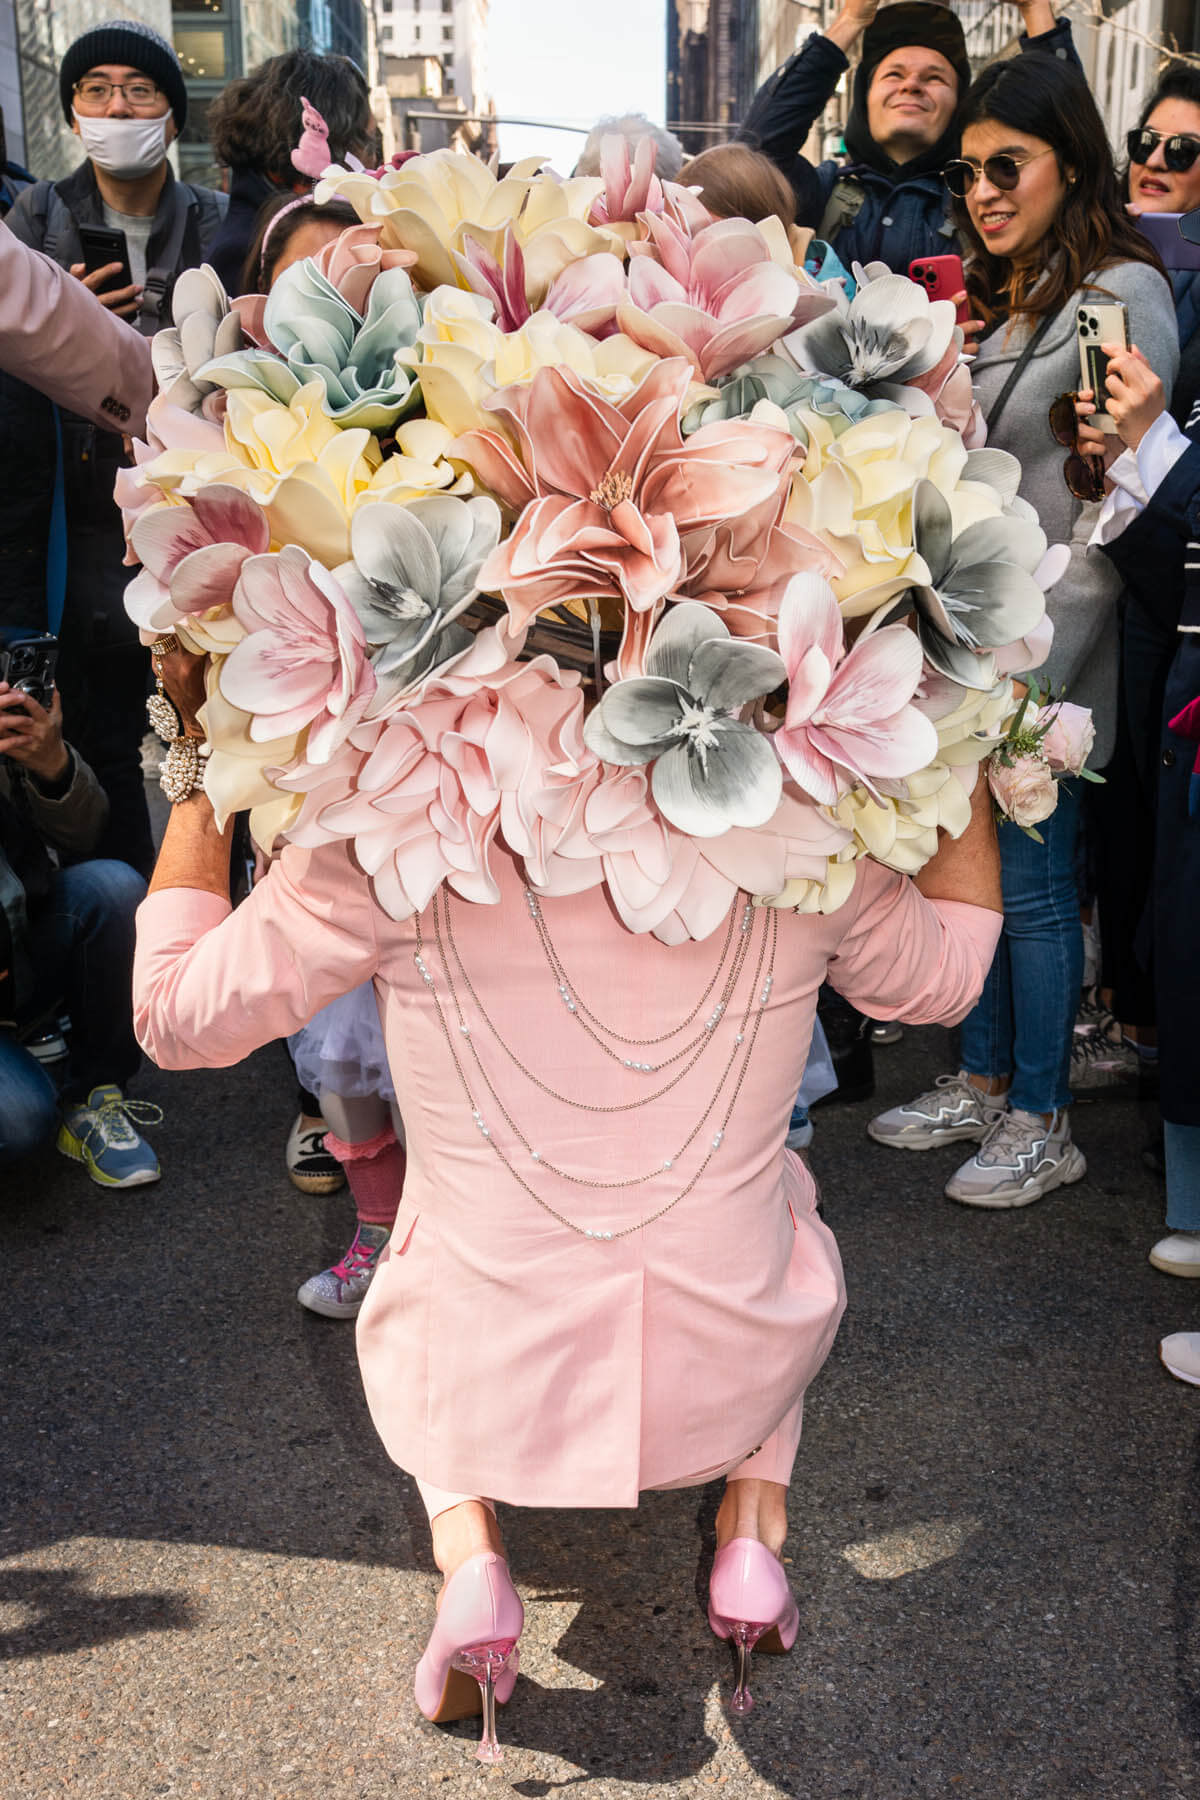 Easter in New York, 2022 - By Smith Galtney